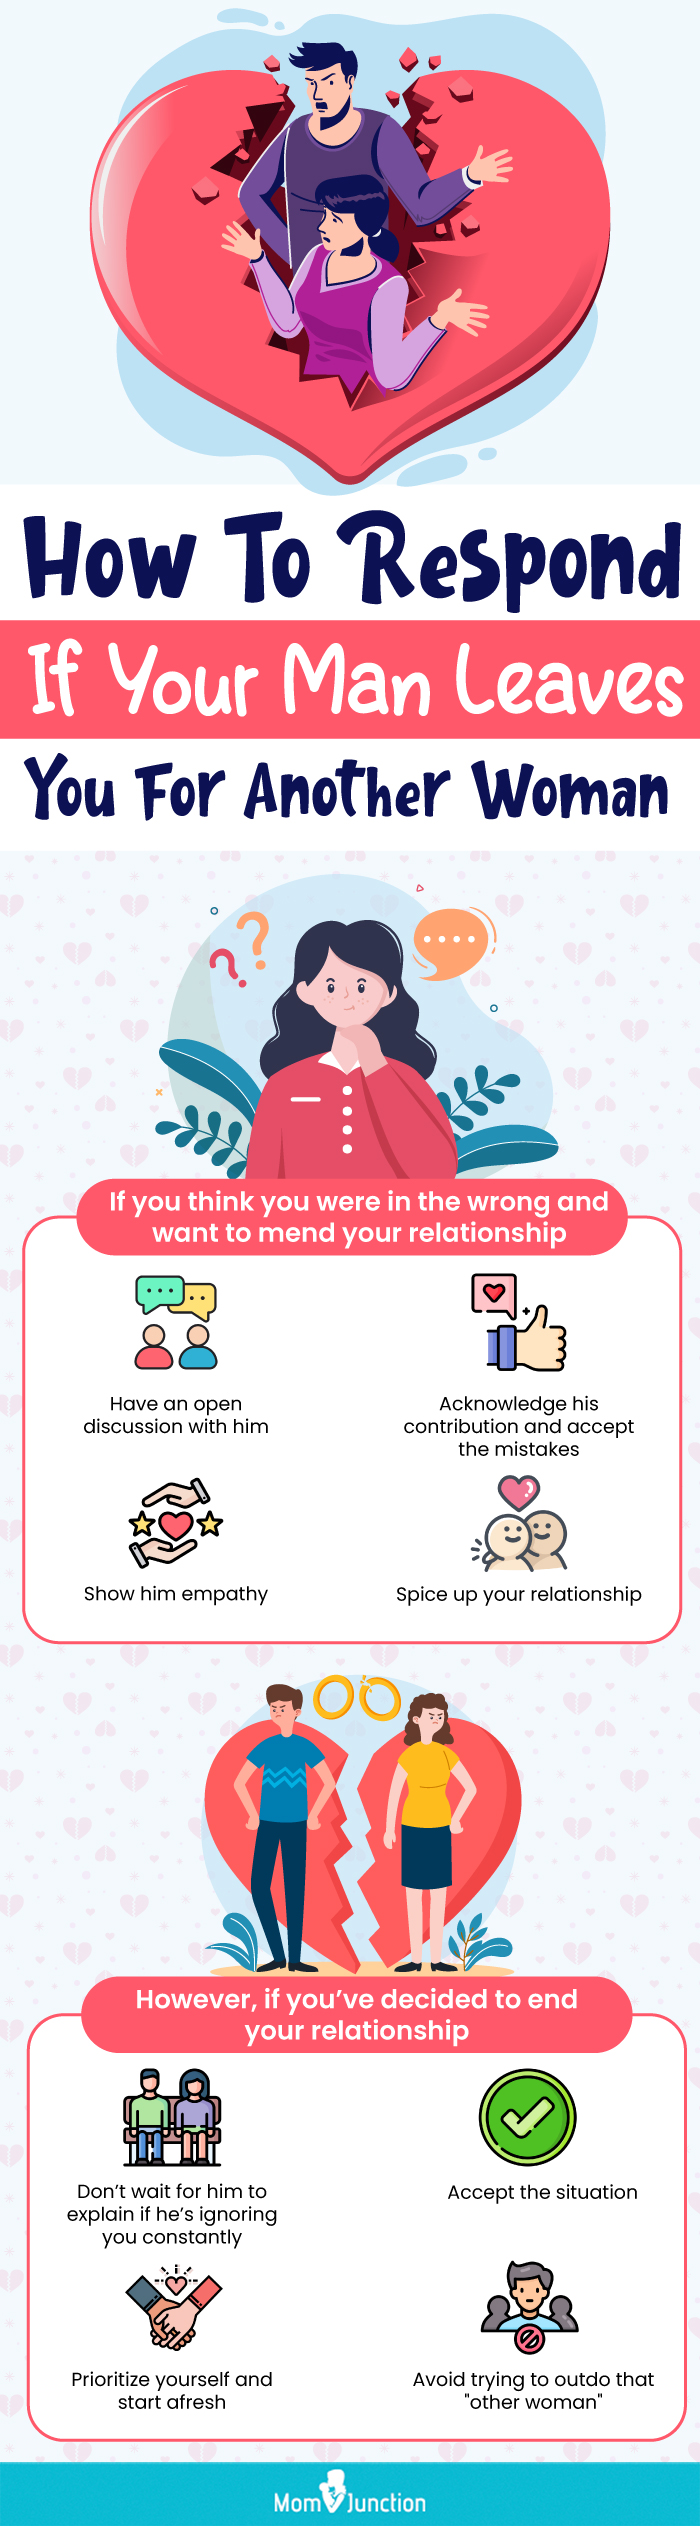 how to respond if your man leaves you for another woman (infographic)